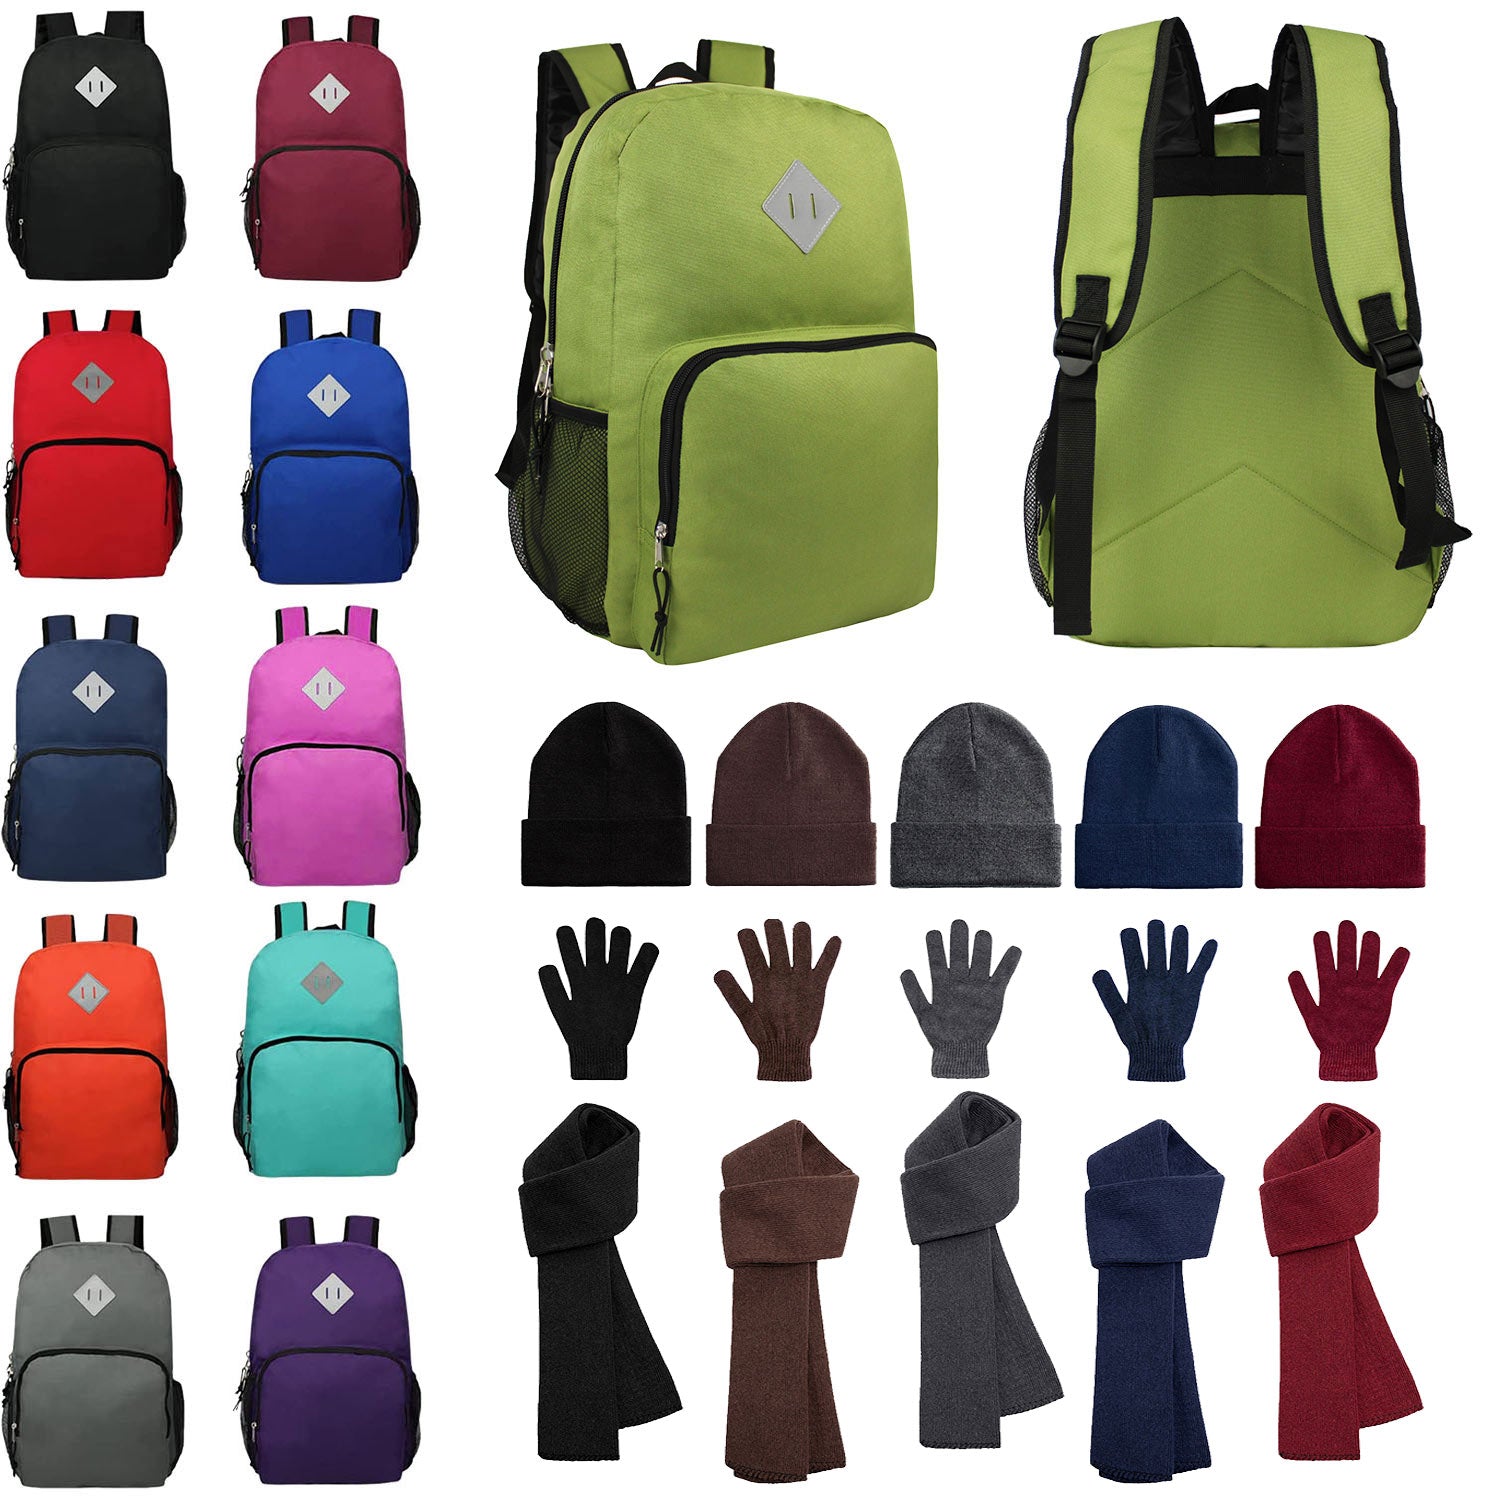 Bulk Case of 12 18" Backpacks and 12 Winter Item Sets - Wholesale Care Package - Emergencies, Homeless, Charity